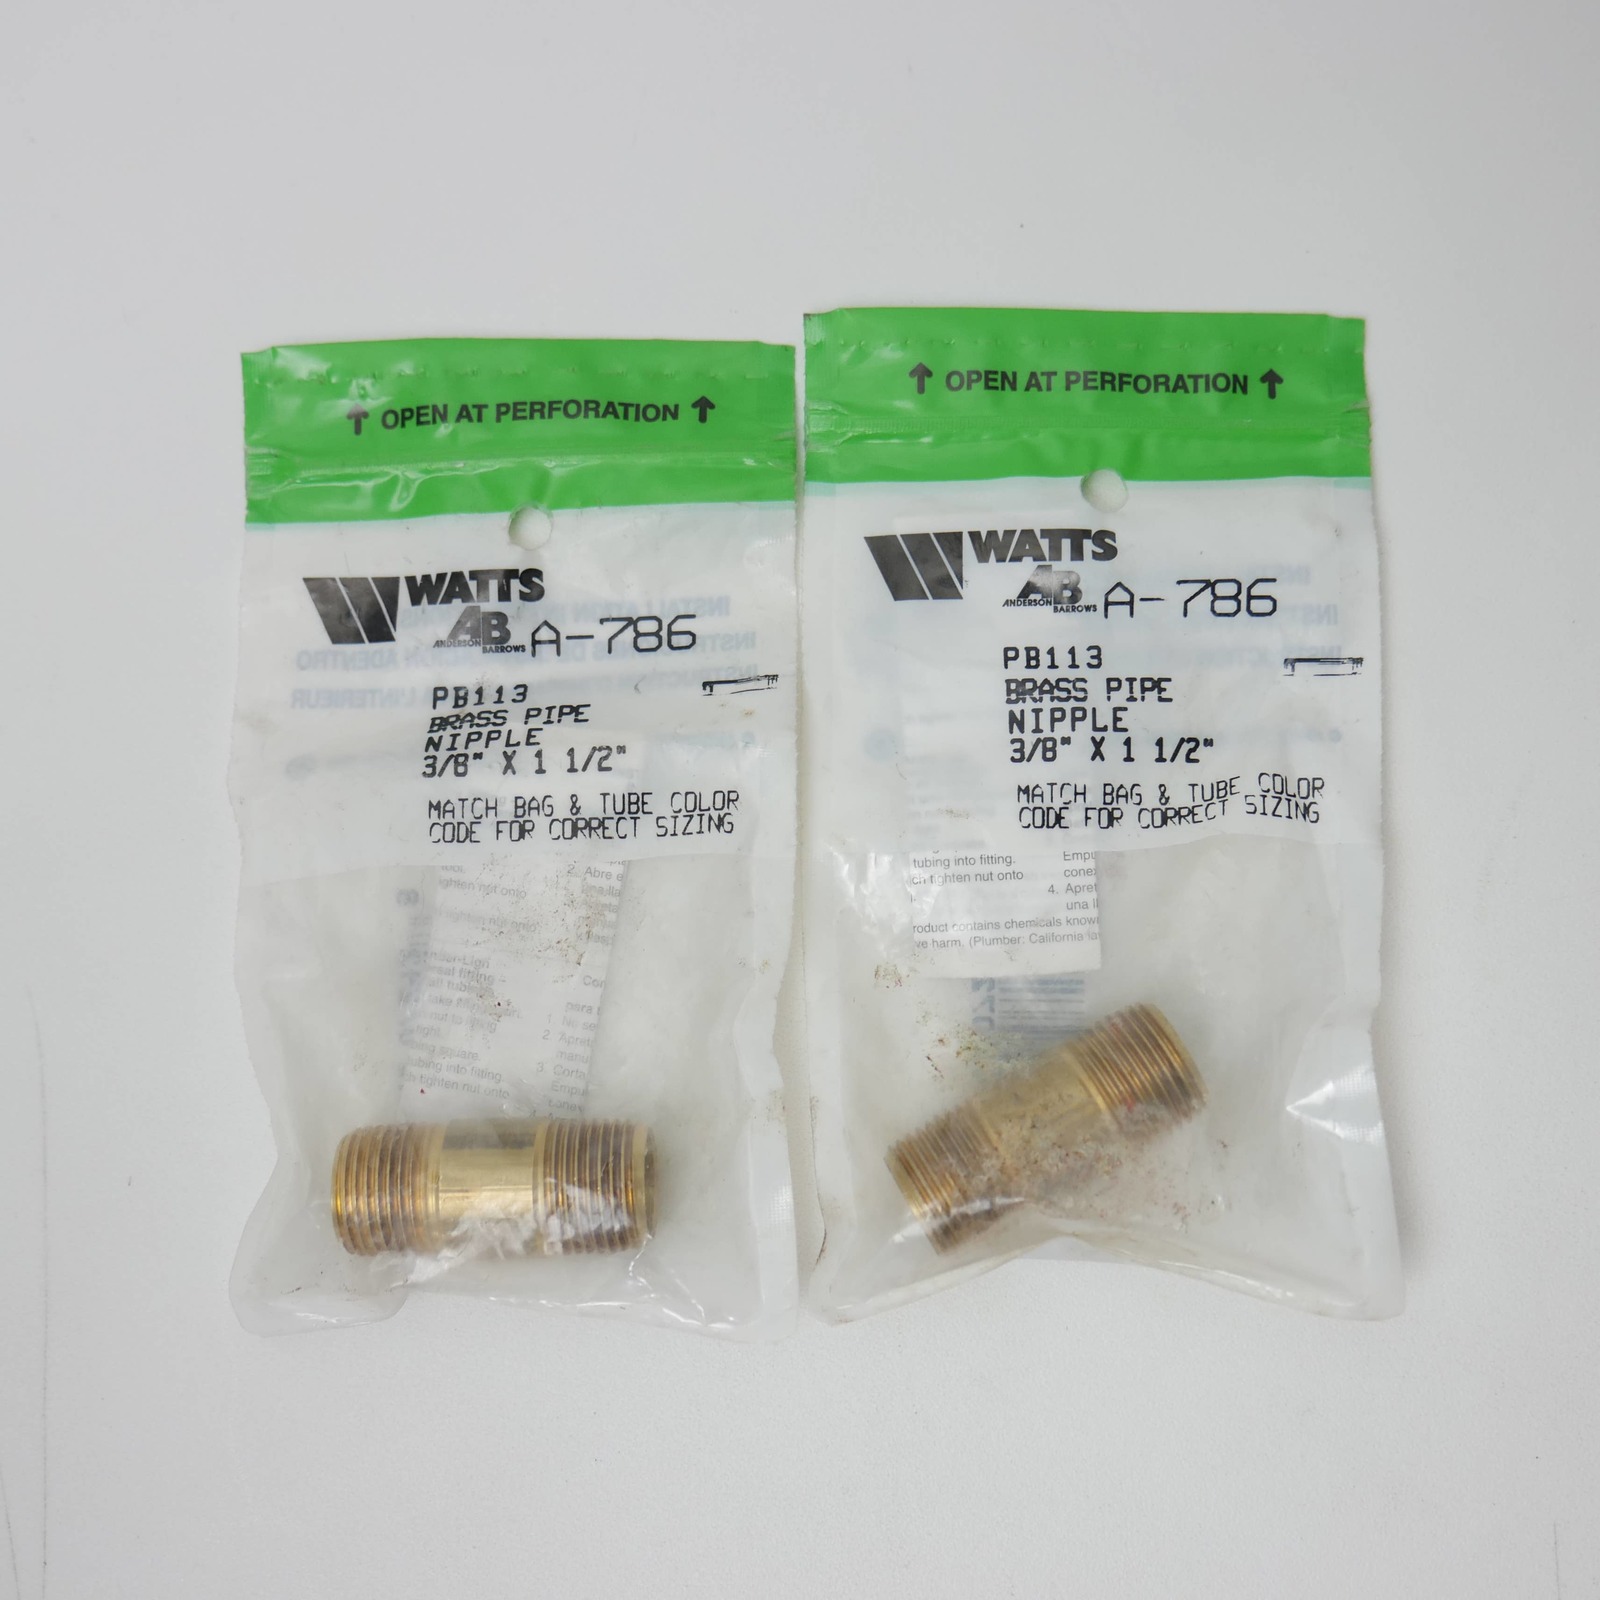 Primary image for Watts A-786 PB113 Brass Pipe Nipple Fitting 3/8" x 1 1/2" (Pack of 2)